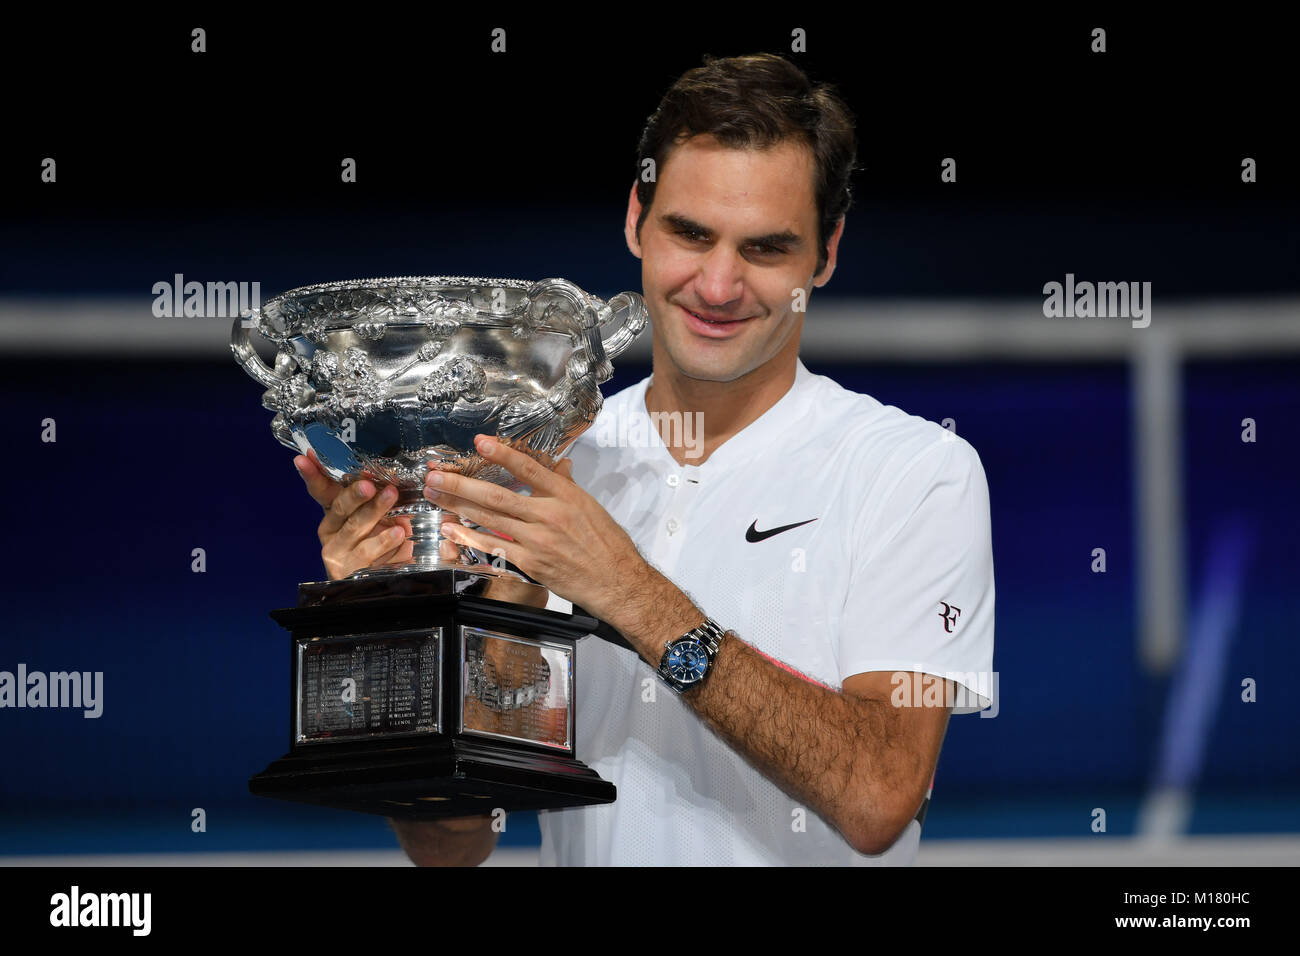 Melbourne, Australia. 28th Jan, 2018. Number two seed Roger Federer of Switzerland poses for photographs with the trophy after winning the Men's Final against number six seed Marin Cilic of Croatia on day fourteen of the 2018 Australian Open Grand Slam tennis tournament in Melbourne, Australia. Federer won 3 sets to 2. Sydney Low/Cal Sport Media/Alamy Live News Stock Photo